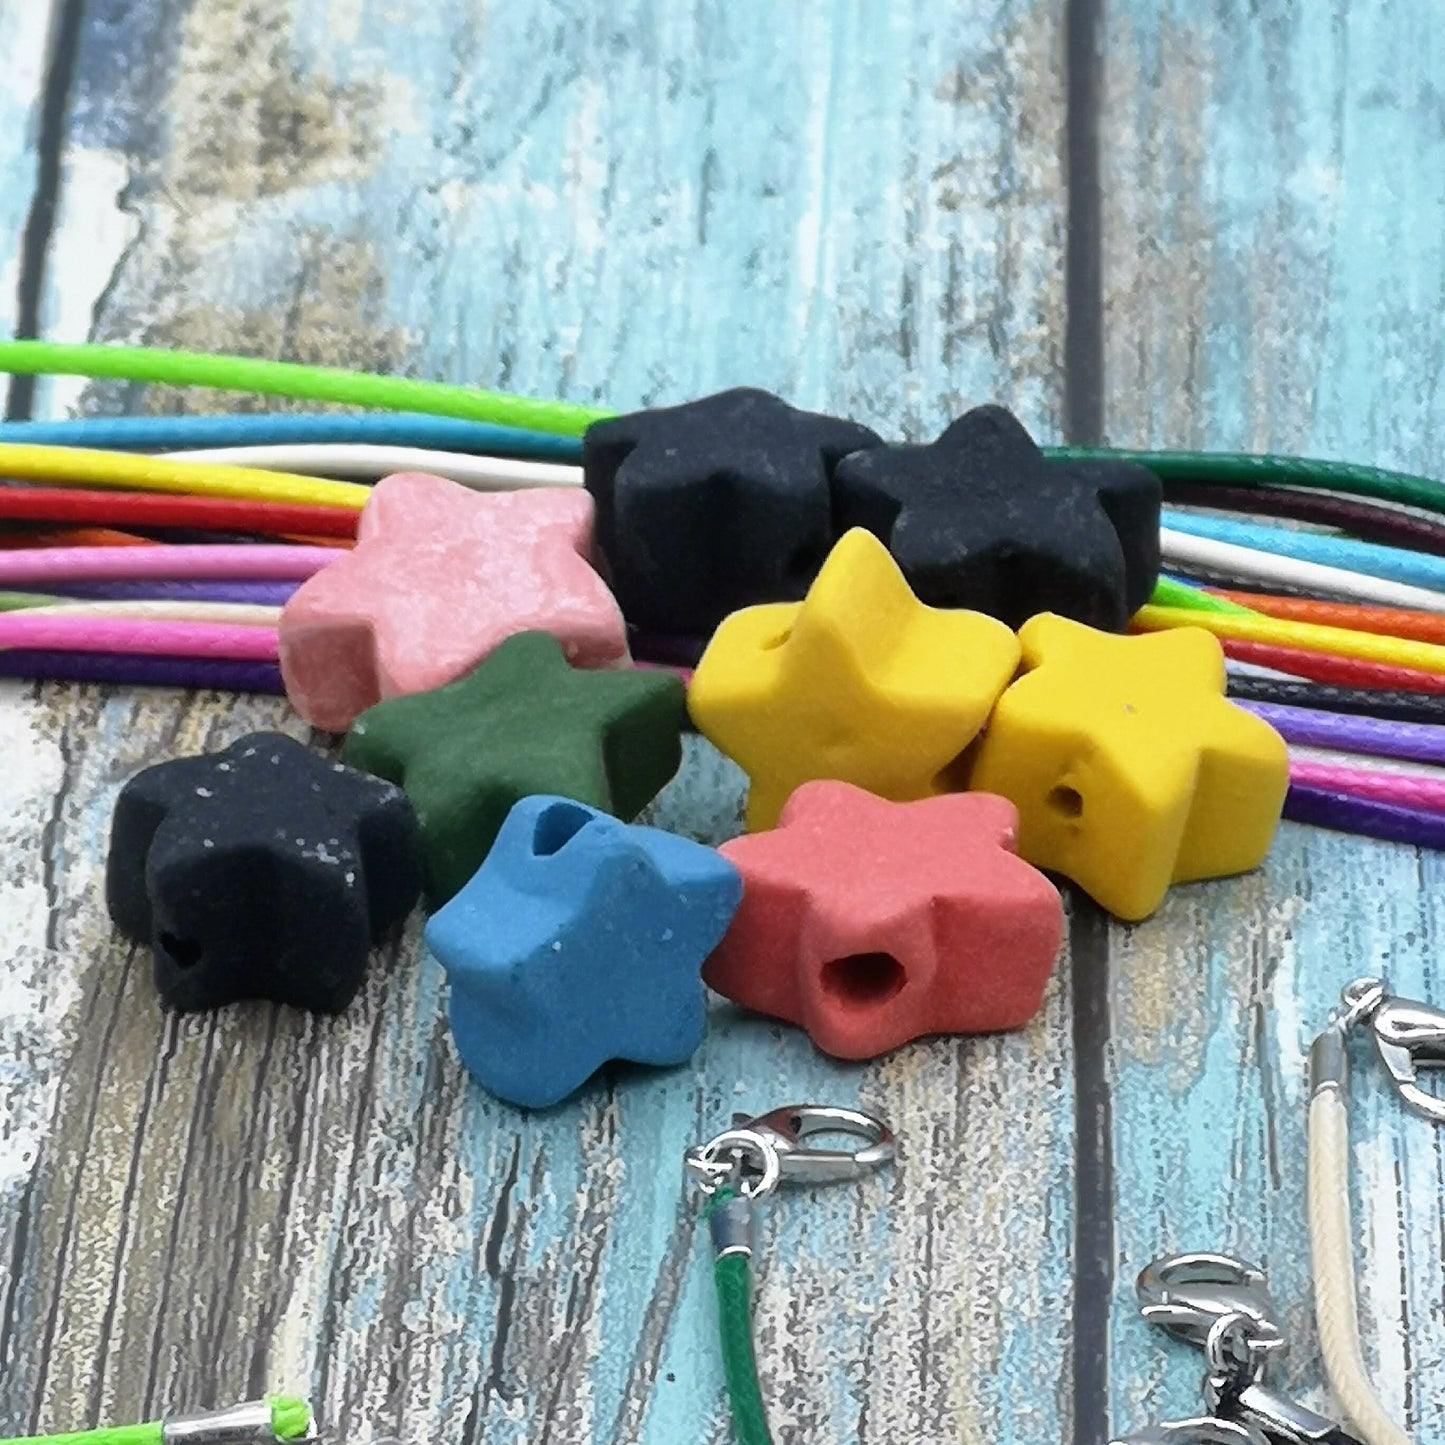 9Pc 15mm Handmade Ceramic Star Beads For Jewelry Making, Assorted Pastel Macrame Beads Large Hole 2mm, Colorful Unique Clay Beads For Crafts - Ceramica Ana Rafael